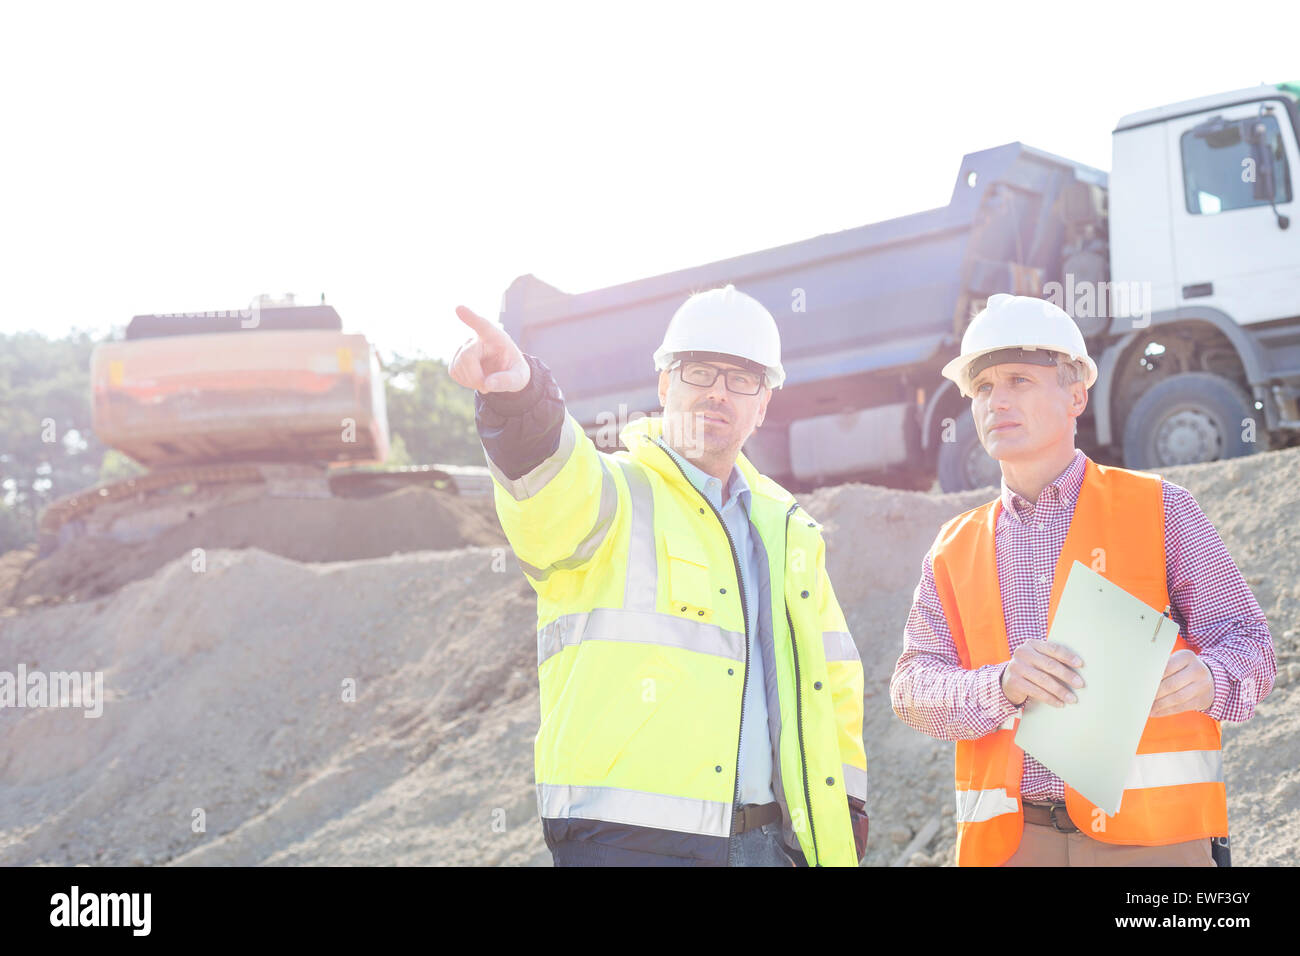 Supervisor showing something to colleague while discussing at construction site Stock Photo